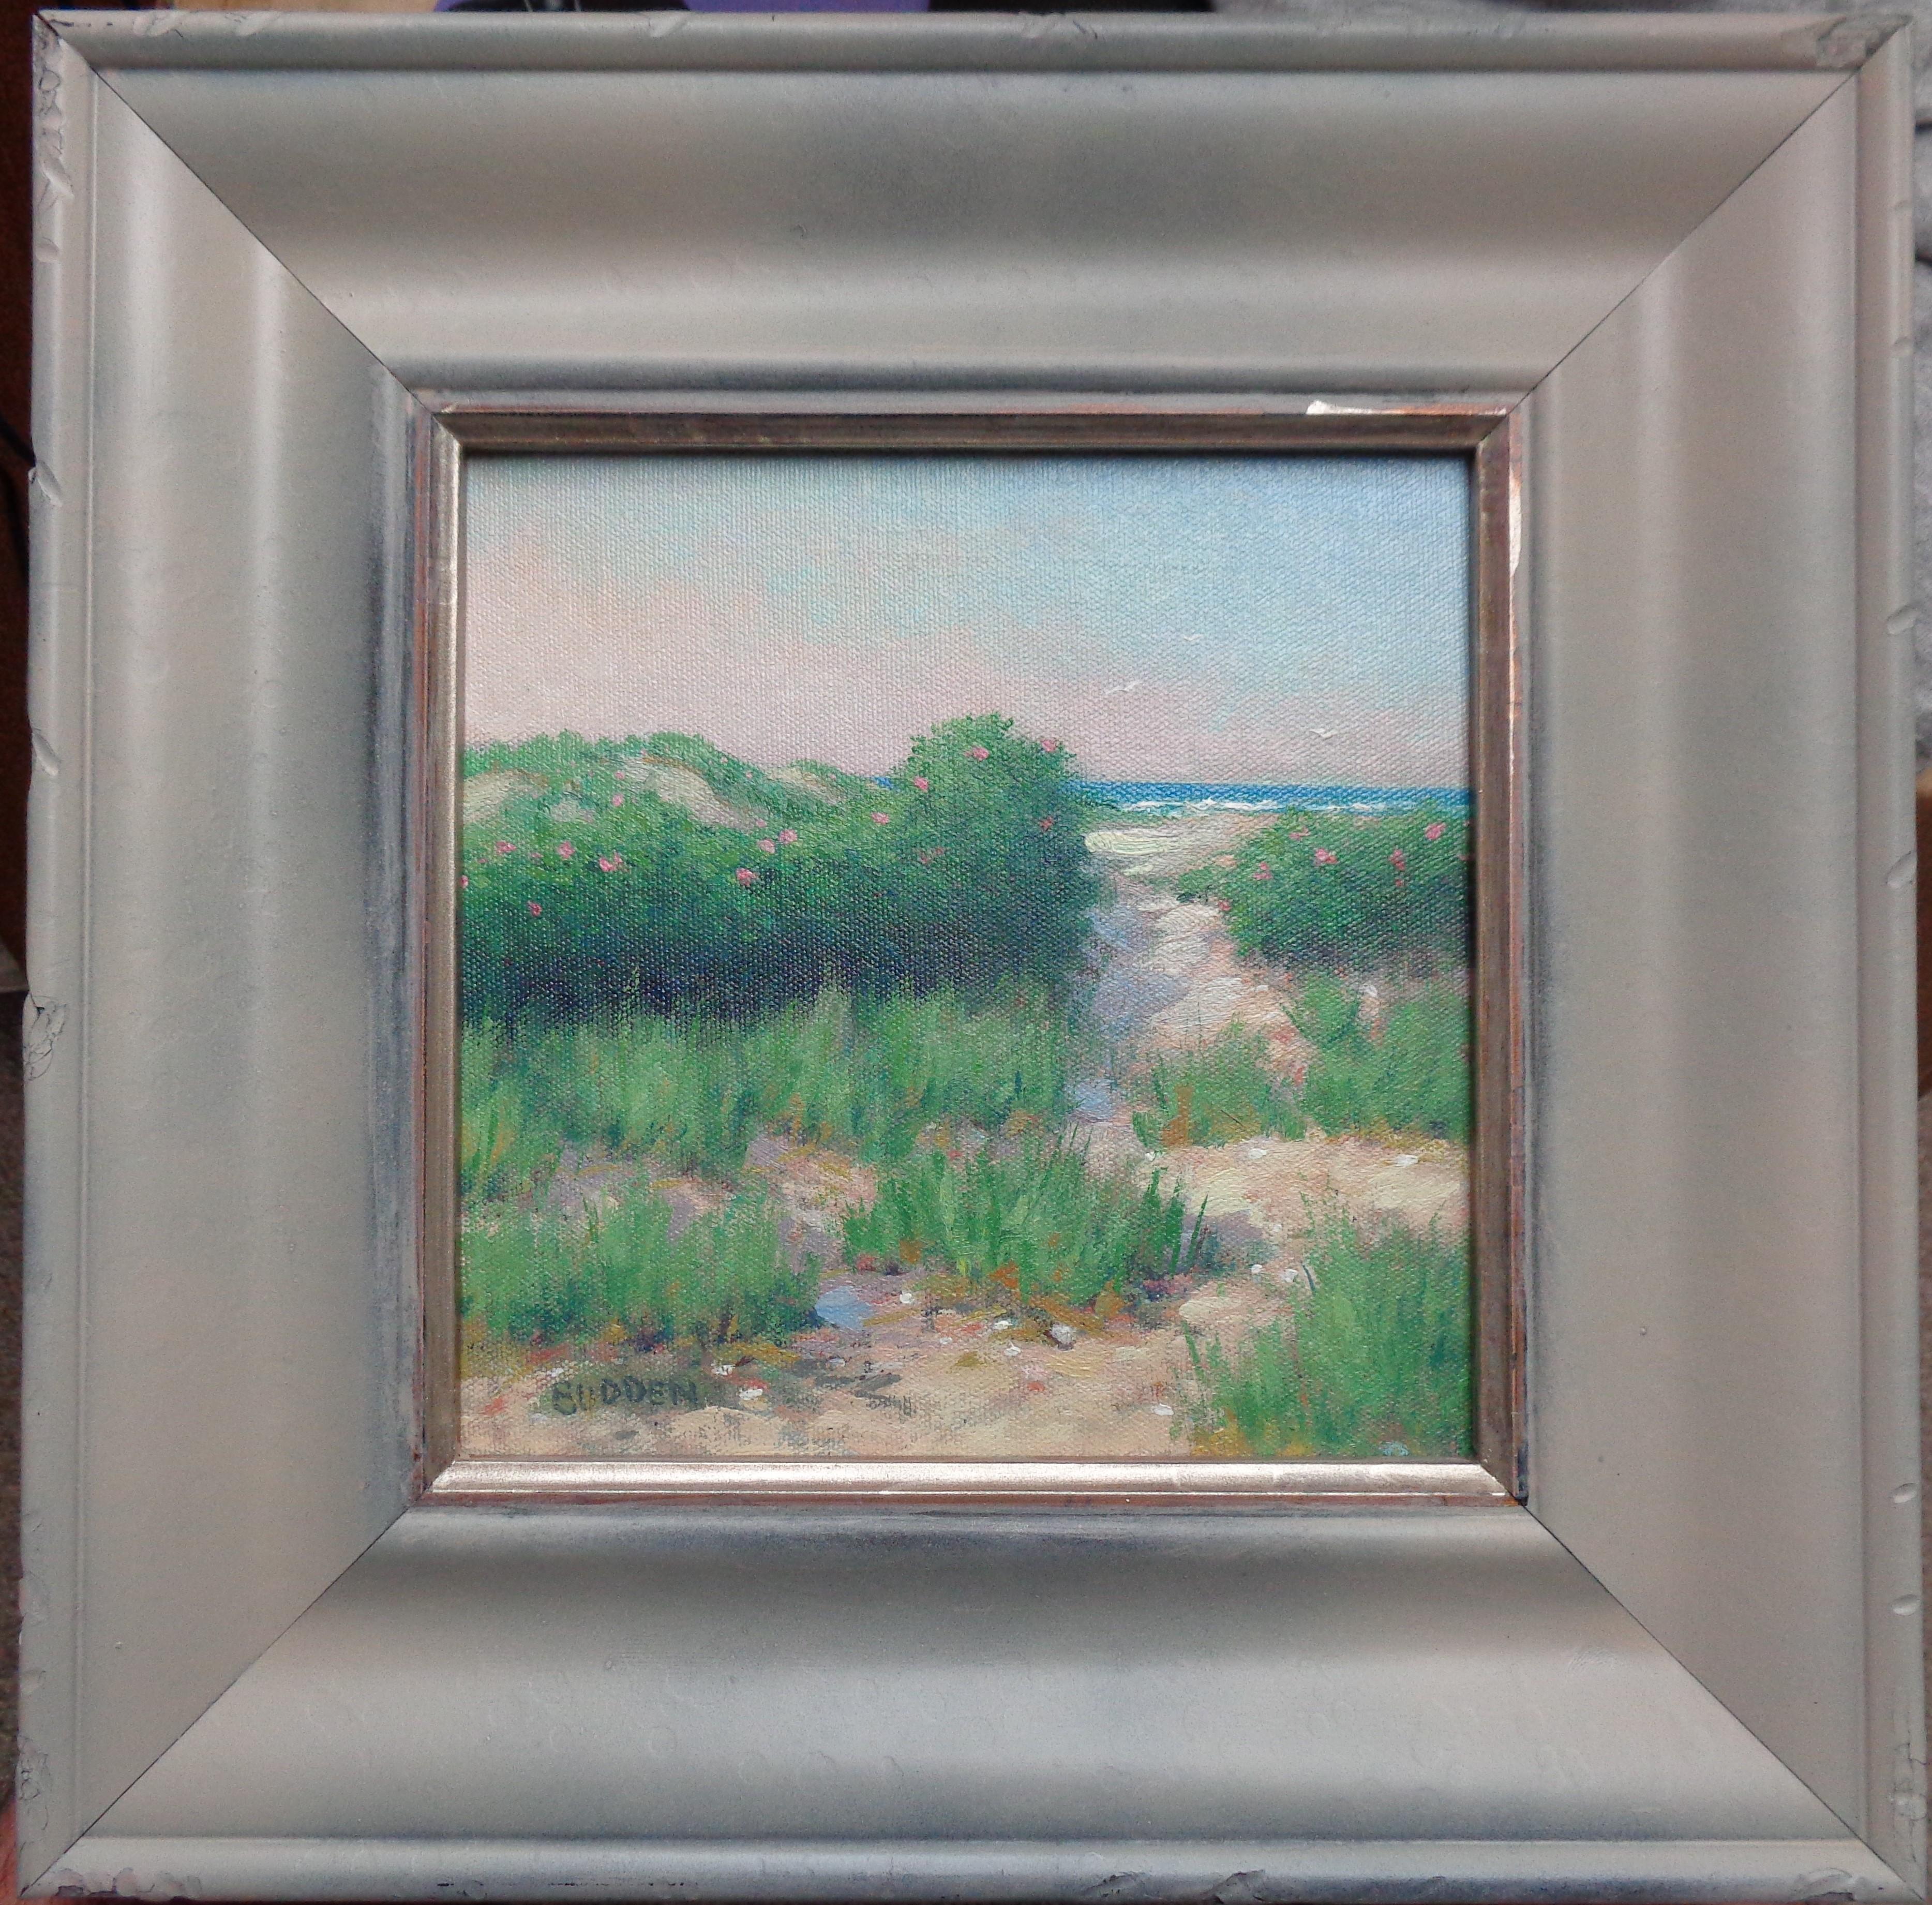 Beach Path
oil/canvas panel image 7.75 x 8 unframed, 13.5 x 13.5 framed
Beach Path is an oil painting on canvas panel by award winning contemporary artist Michael Budden that showcases a beautiful beach path with lush greens thru the dunes to the